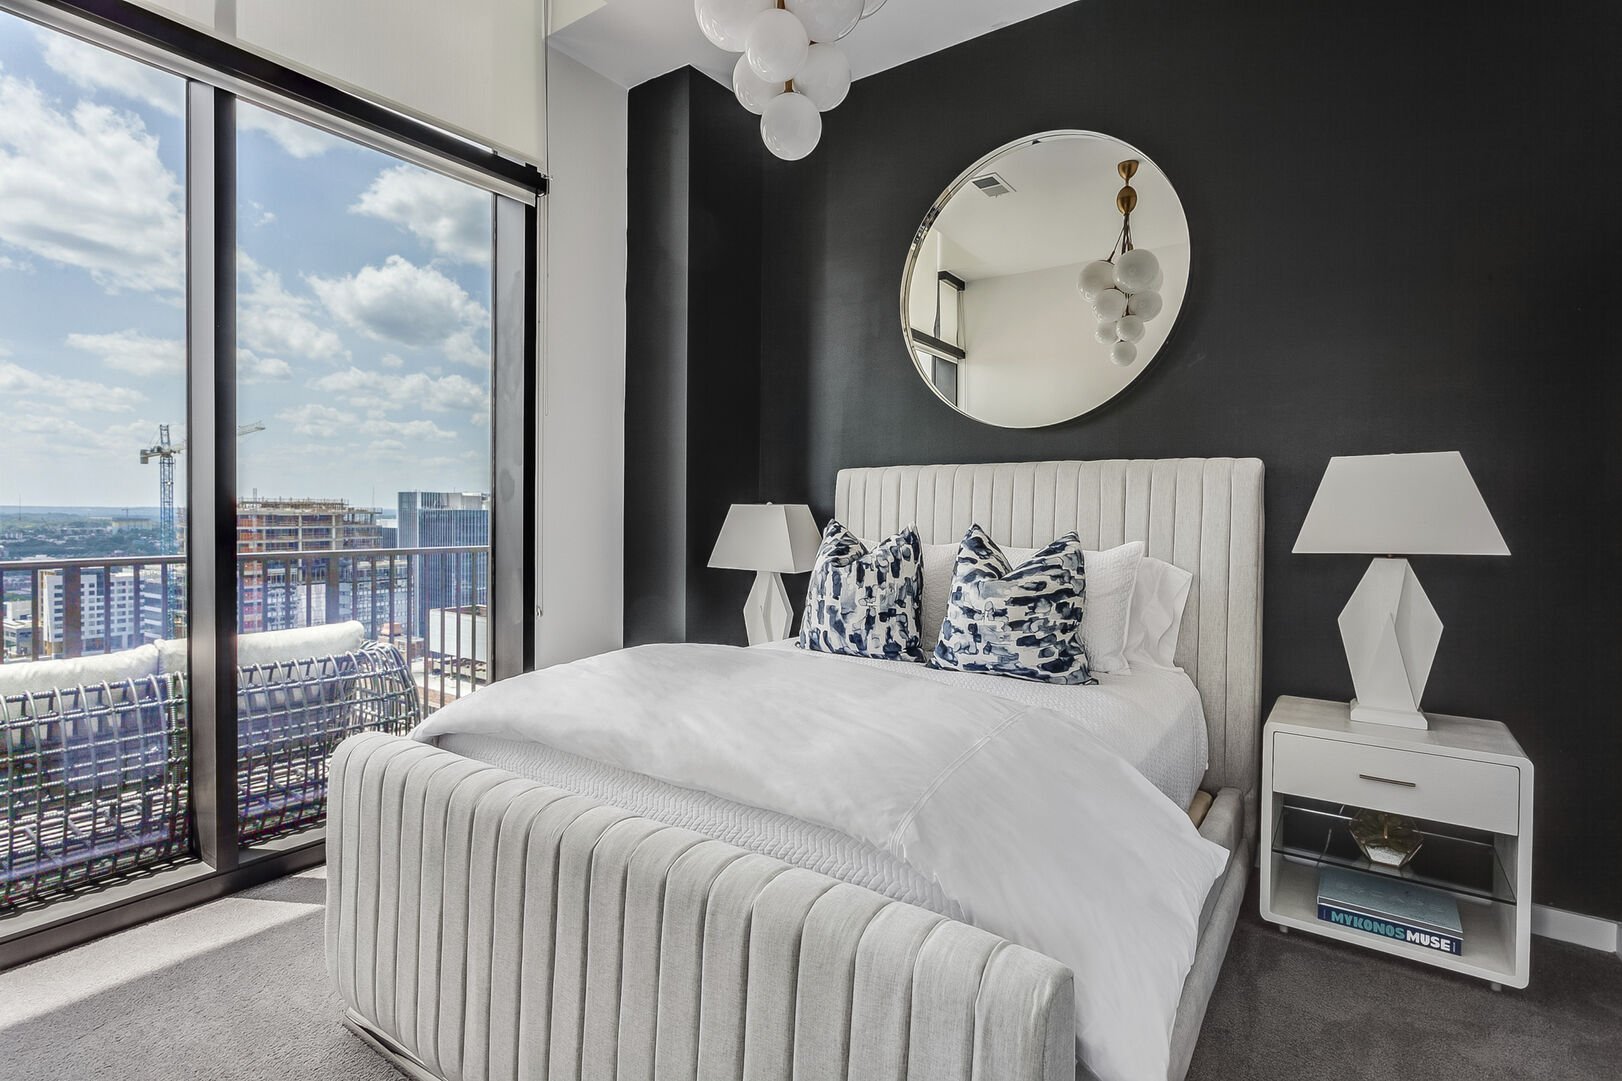 Guest Bedroom Includes Bed, Two Side Tables, and Stunning Views.